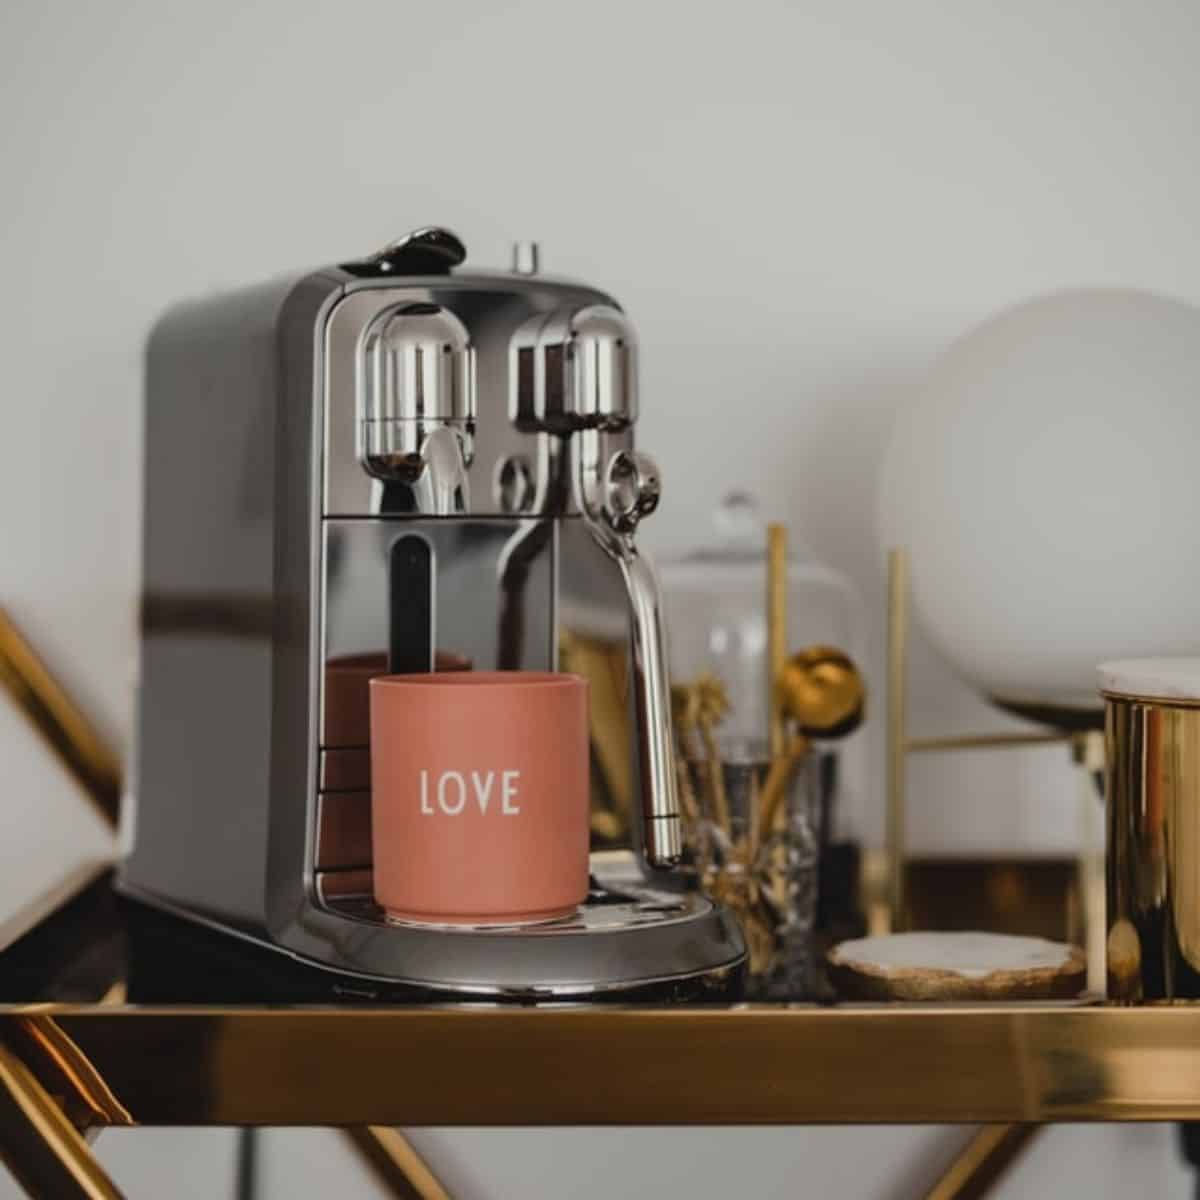 The Best Coffee Makers and Espresso Machines of 2022